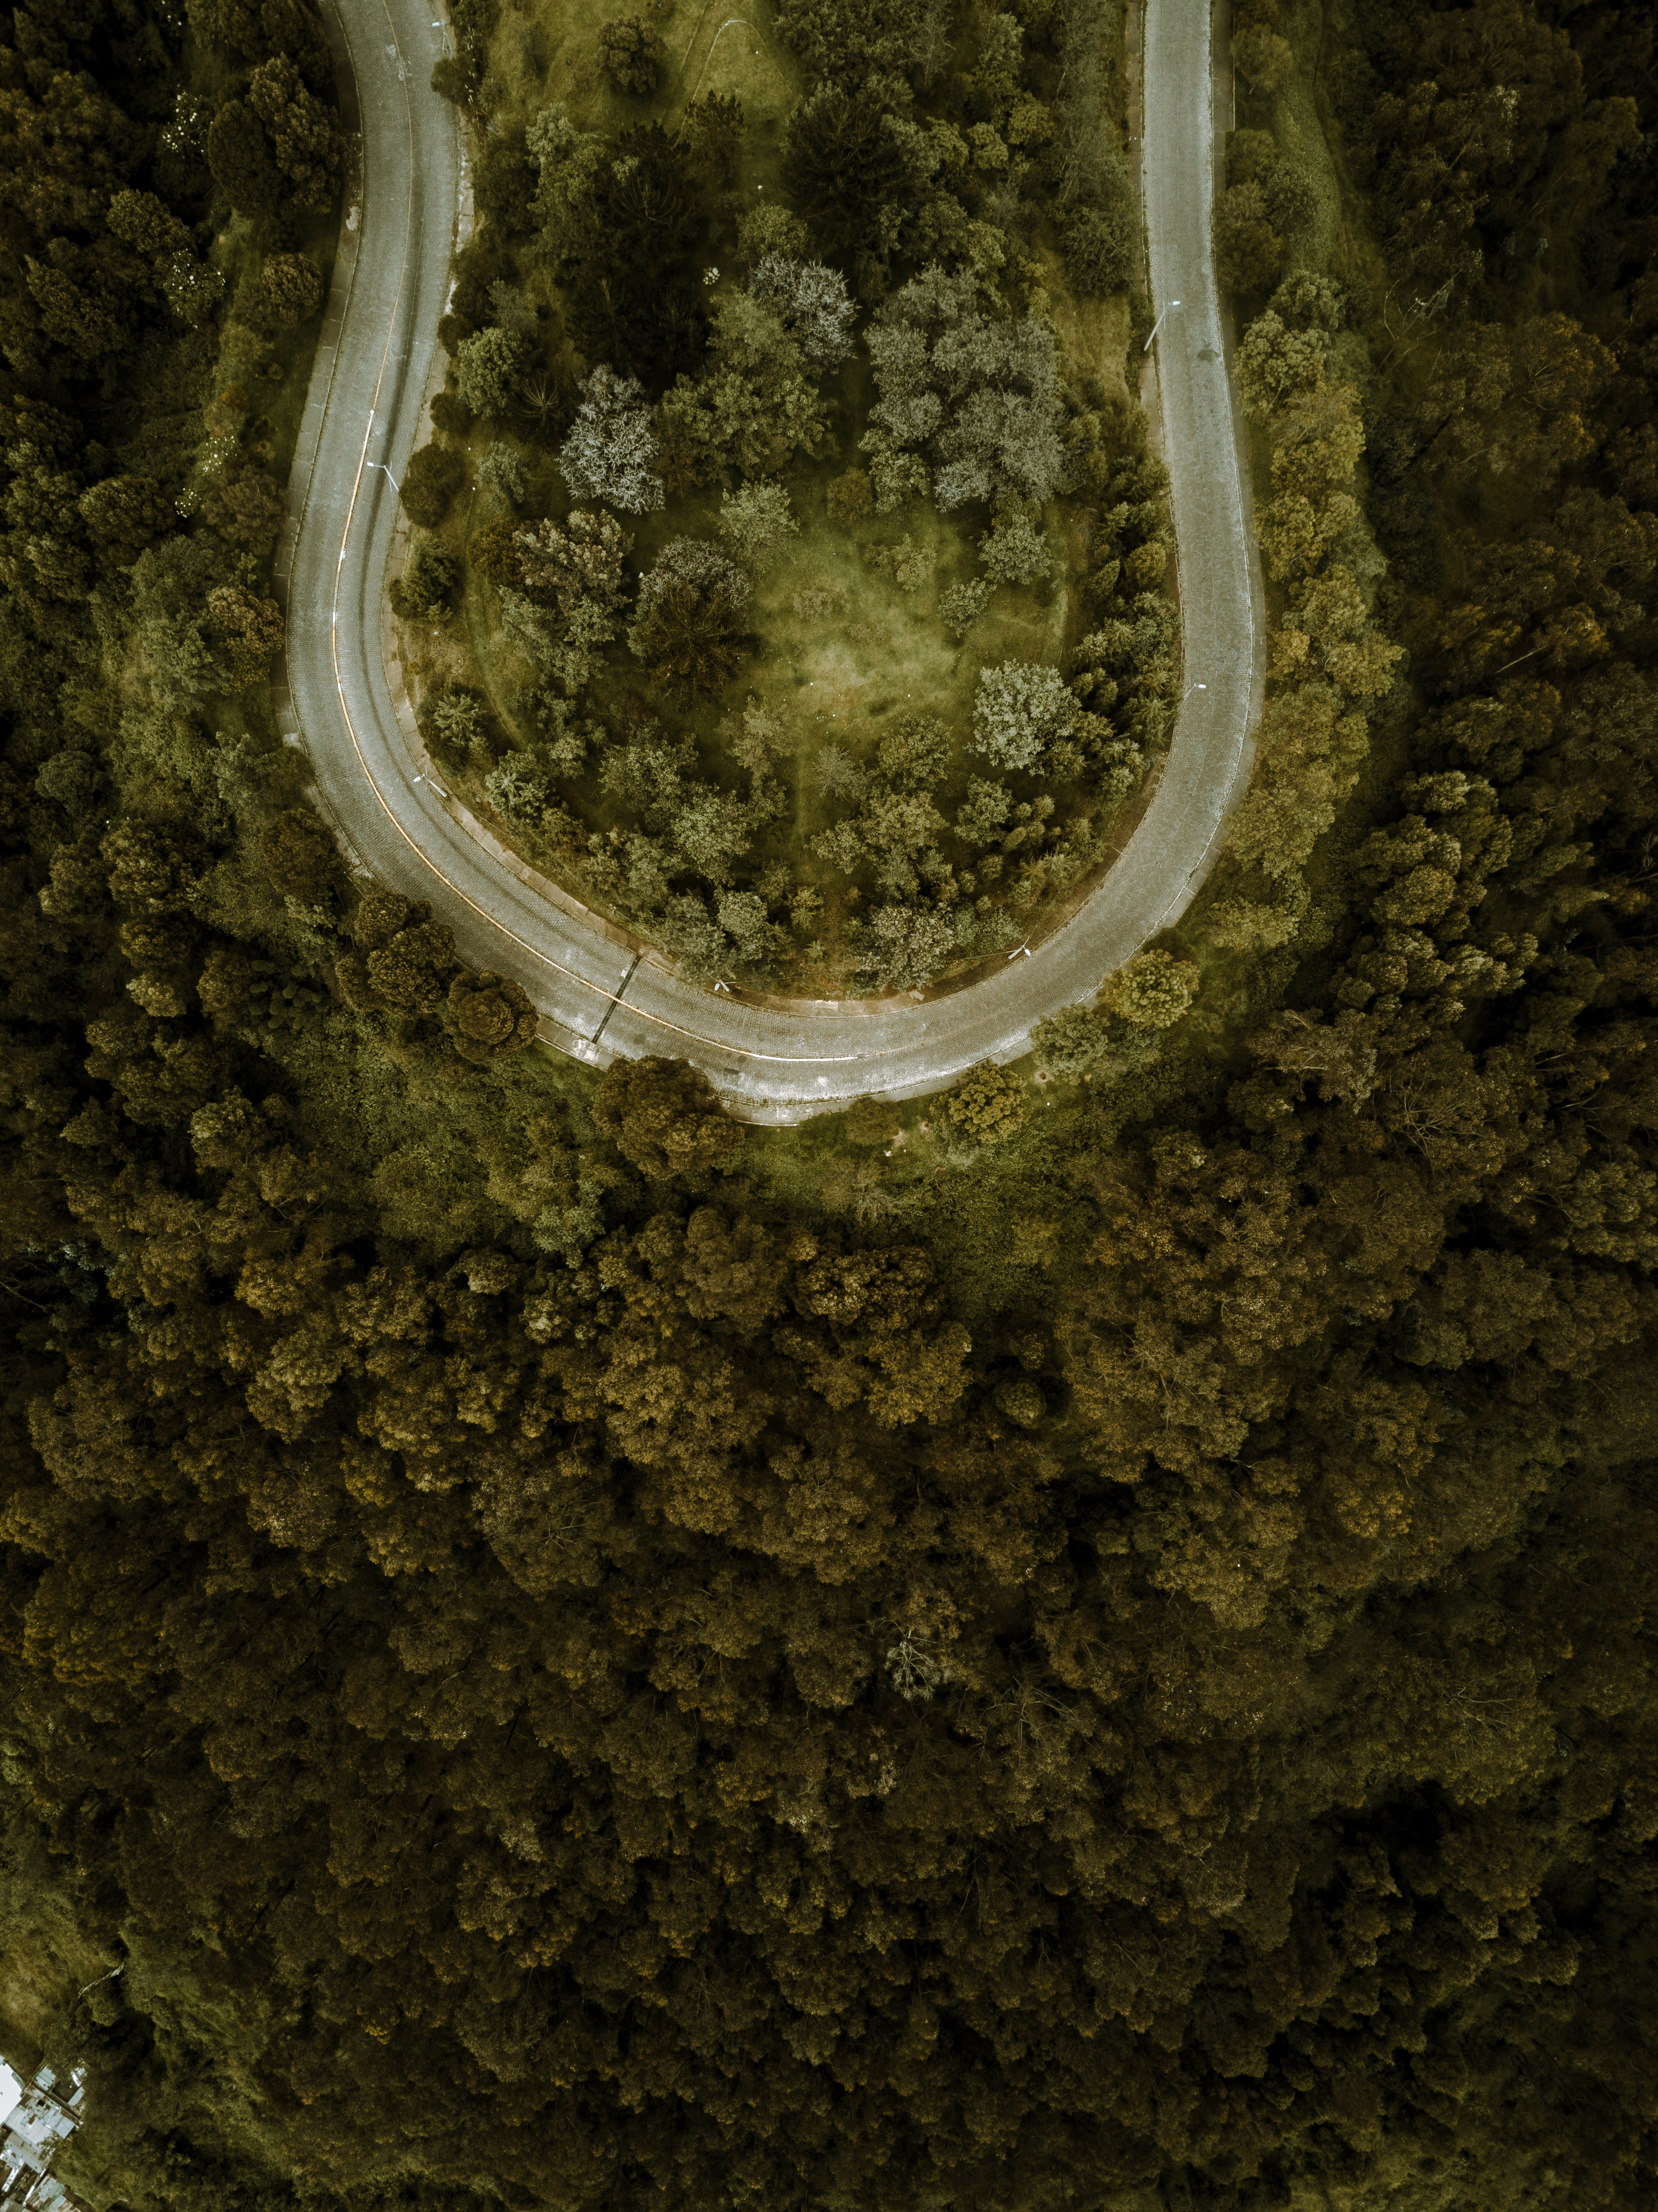 view from above, nature, road, turn, forest, winding, sinuous